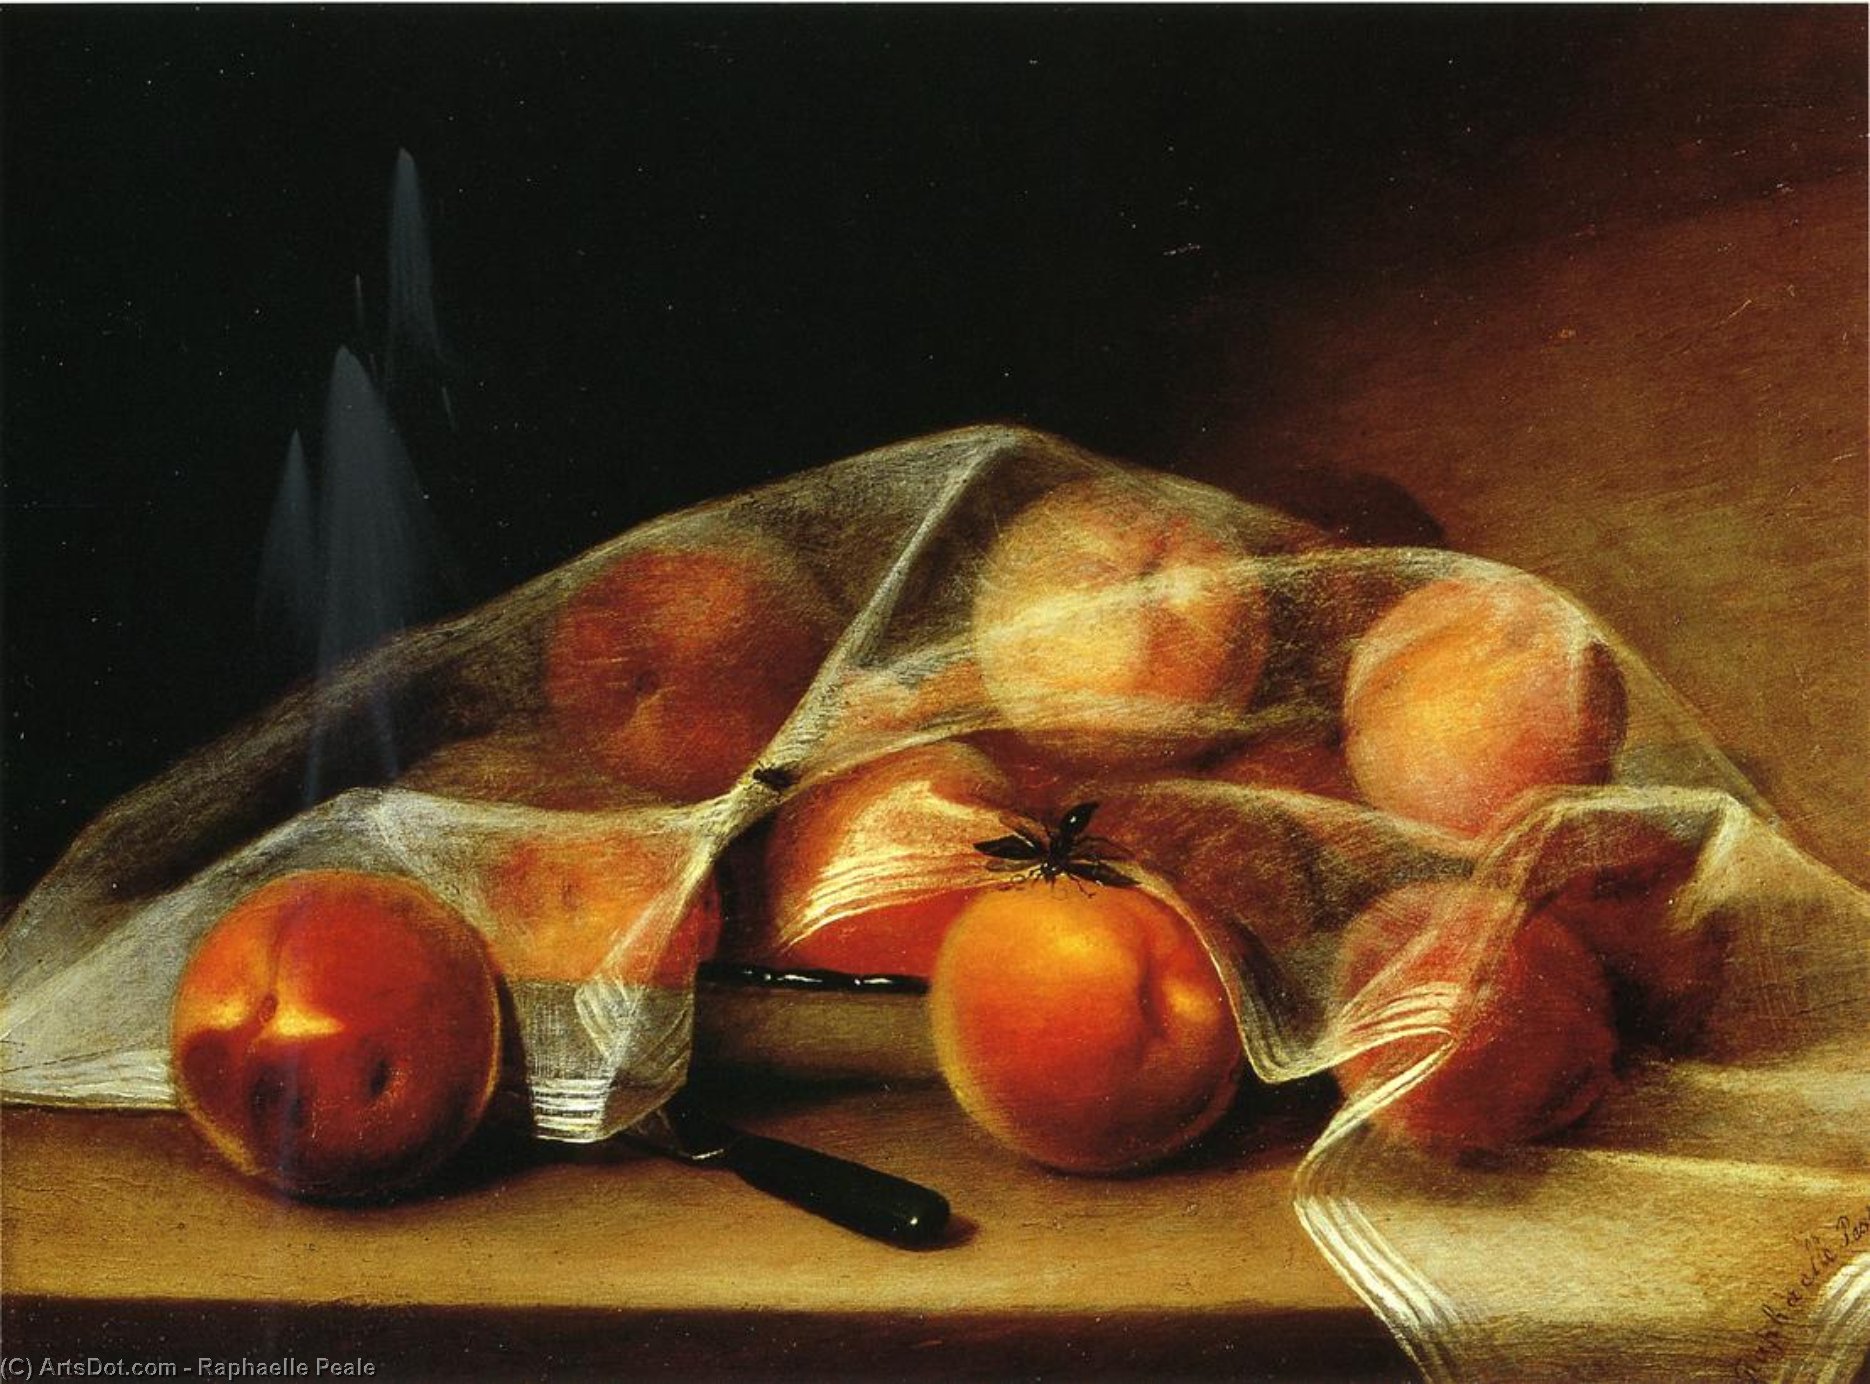 WikiOO.org - 백과 사전 - 회화, 삽화 Raphaelle Peale - Fruit Piece with Peaches Covered by a Handkerchief (also known as Covered Peaches)